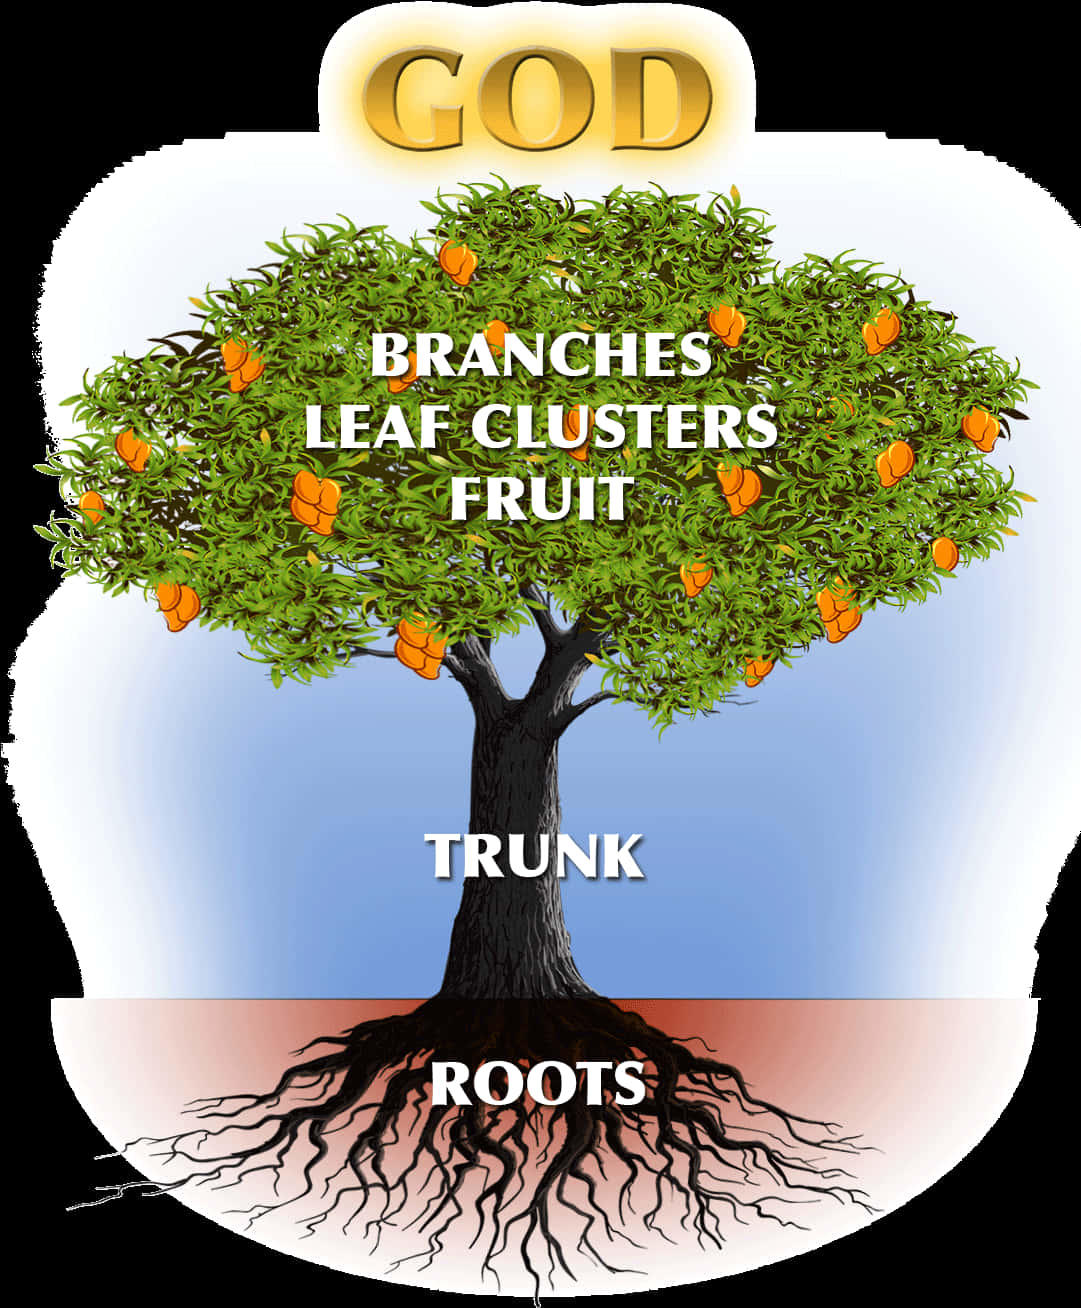 A Tree With Fruits And Roots